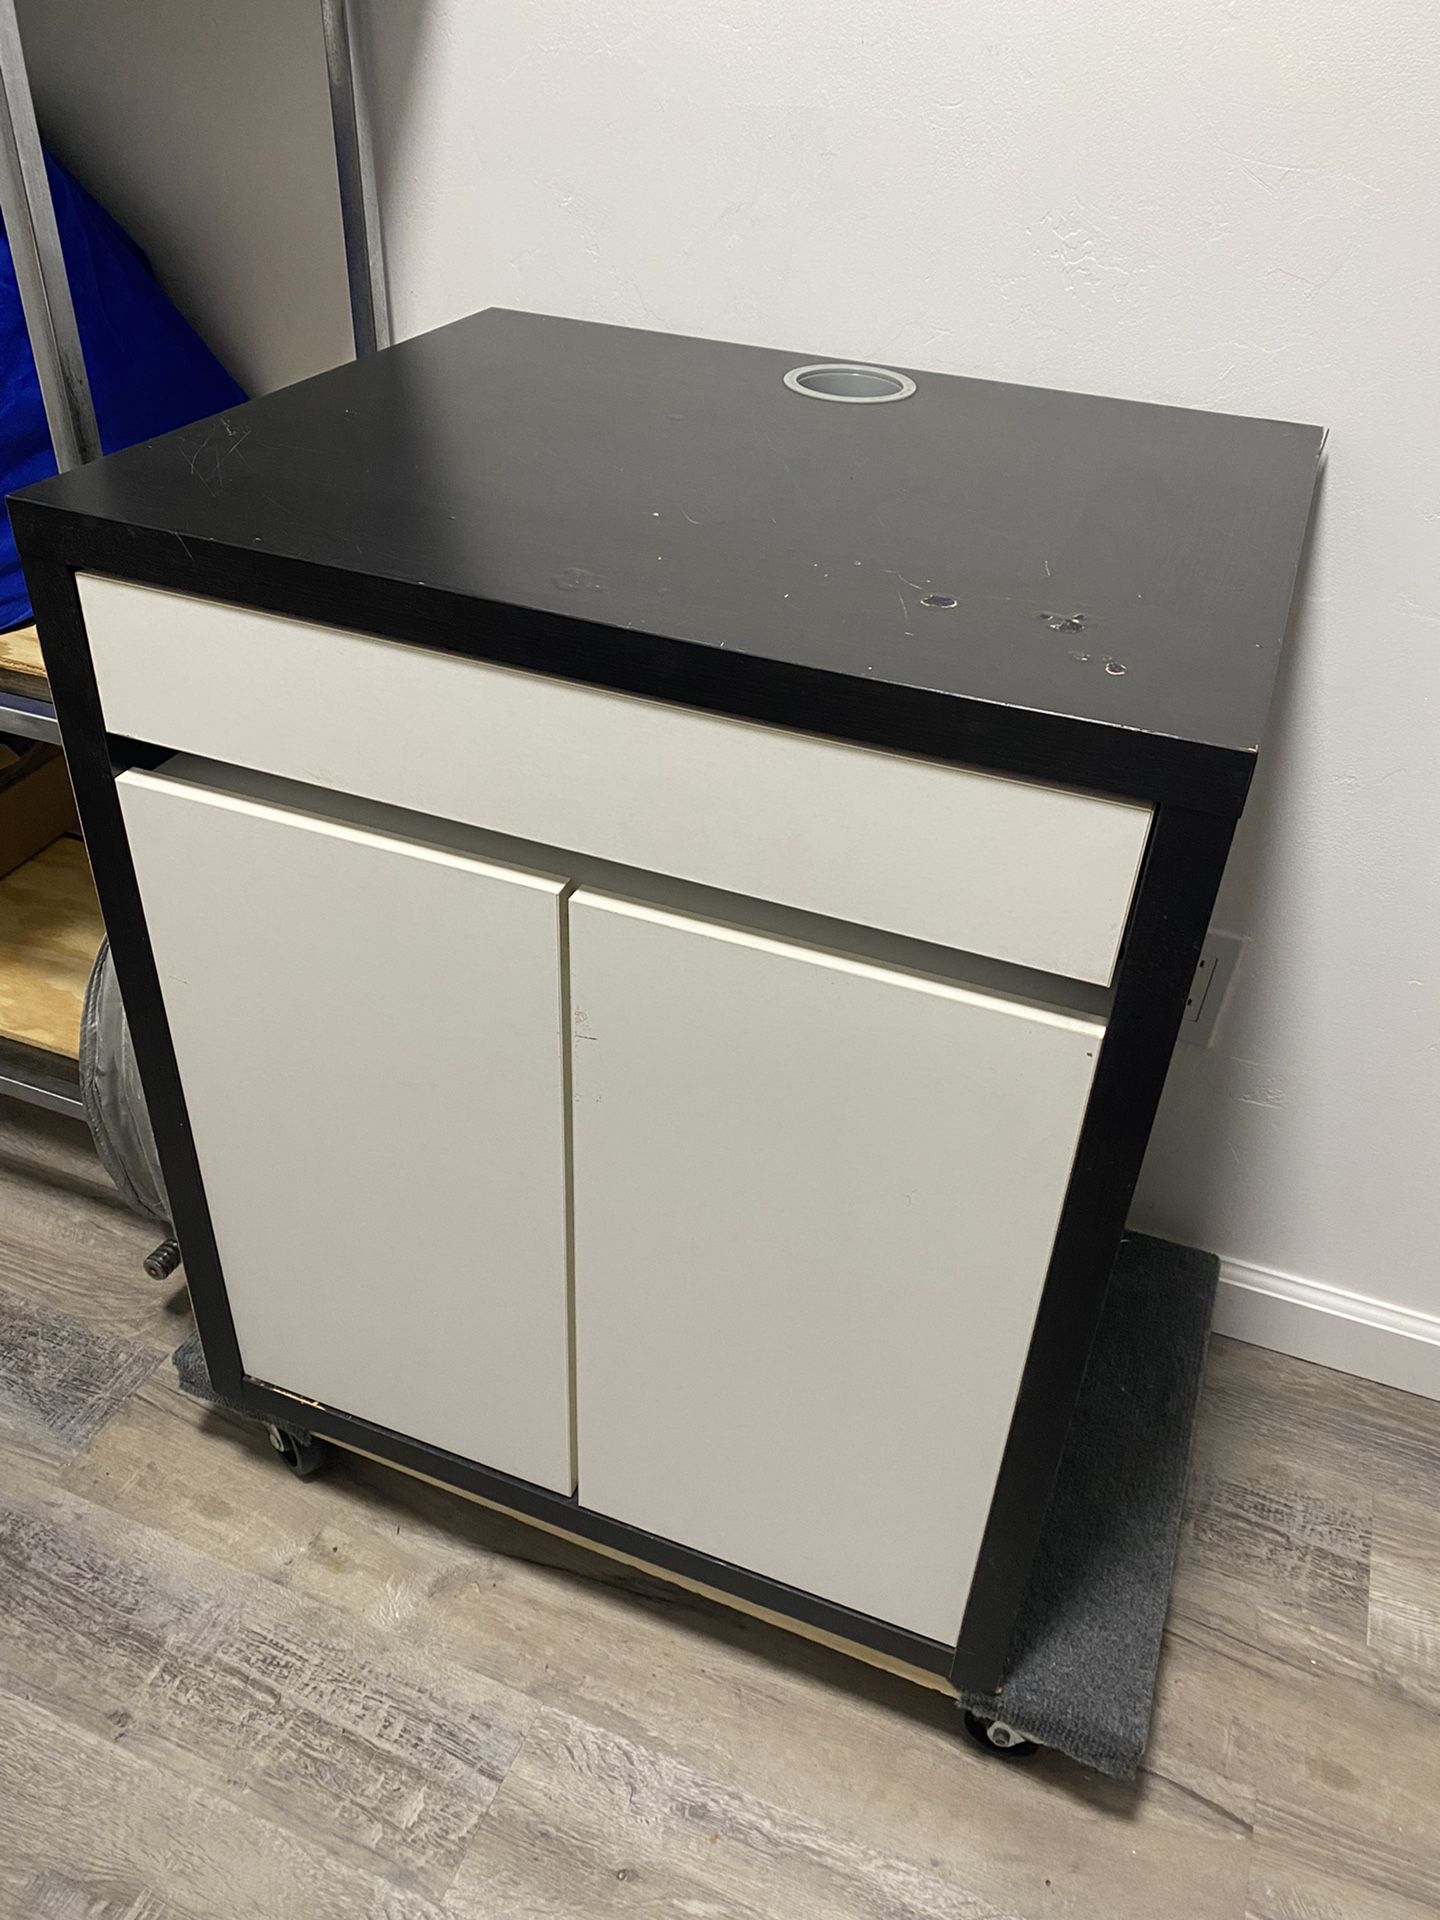 Two Sided Storage Cabinet With Drawer. Great For Office , Bedroom Or tV Stand .